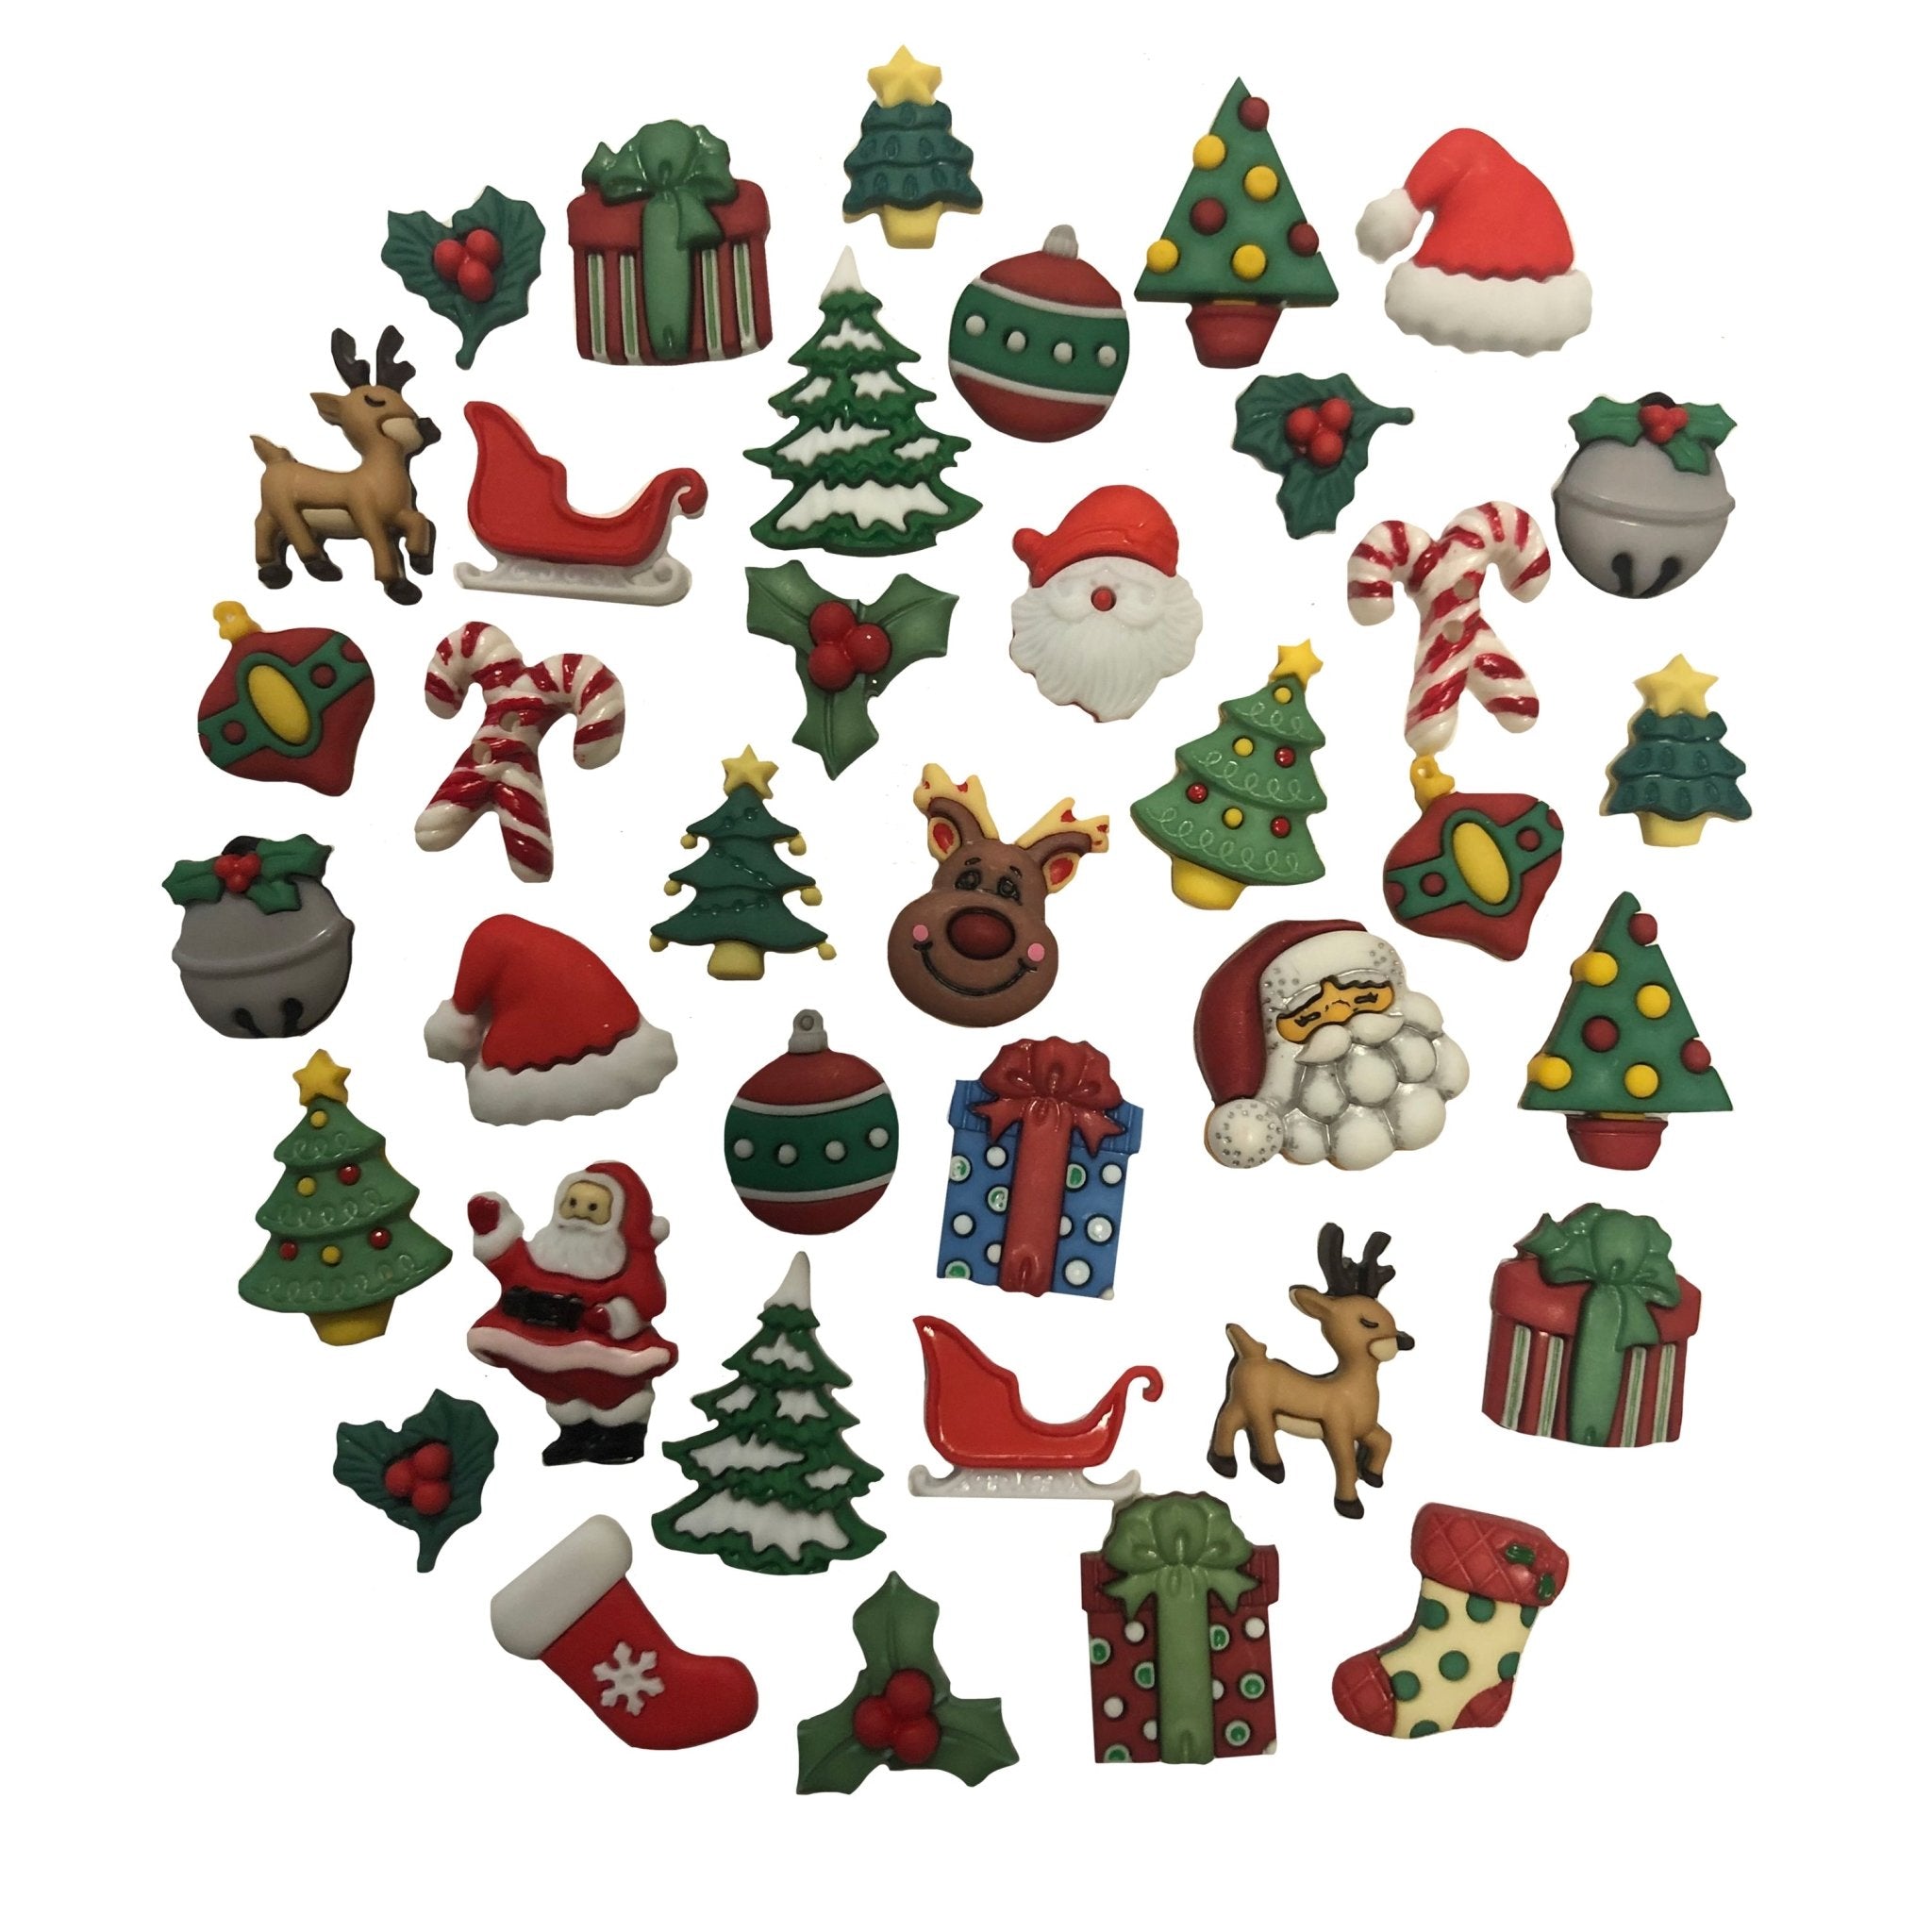 Christmas Novelty Buttons Assortment - Buttons Galore and More